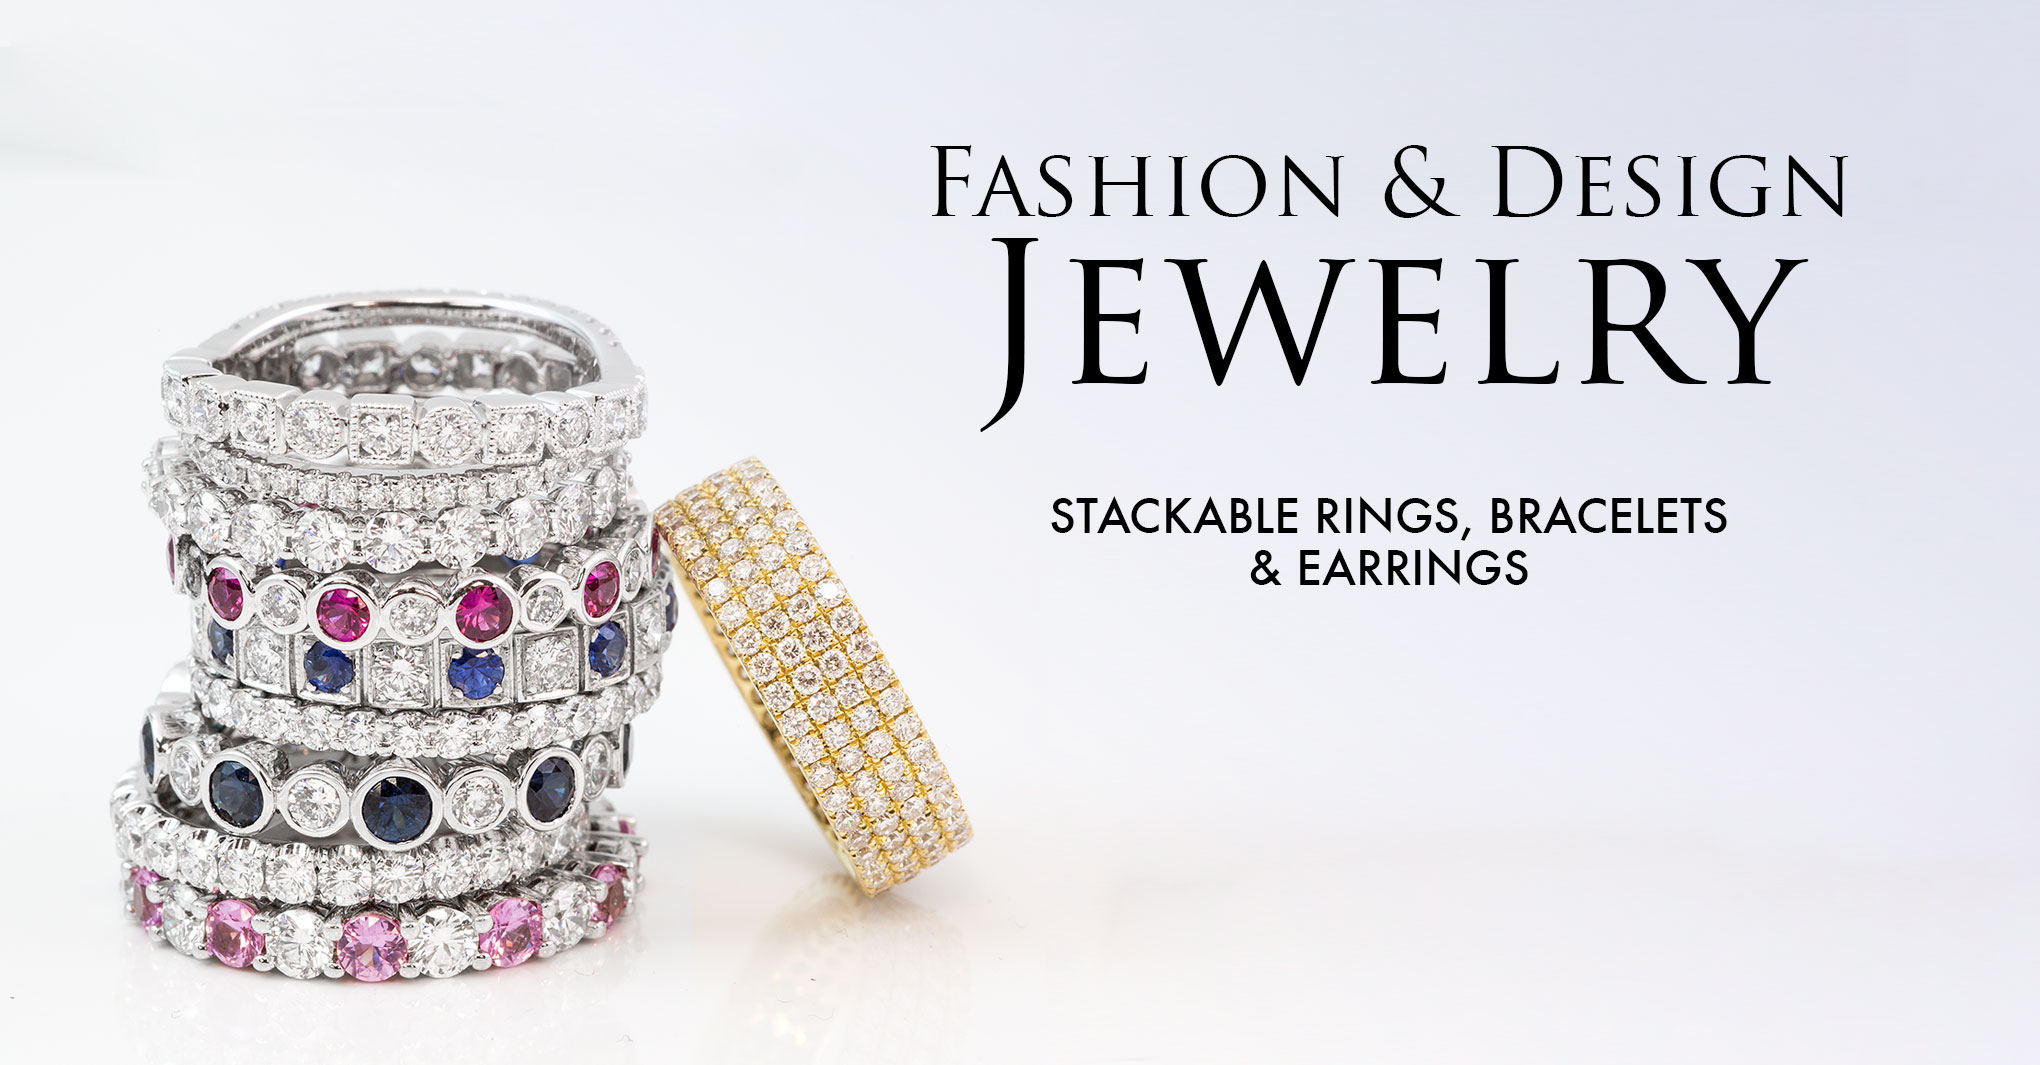 Fashion Jewelry Stackable Rings, Bracelets, Rings - 3804 Sepulveda Blvd, Torrance 90505